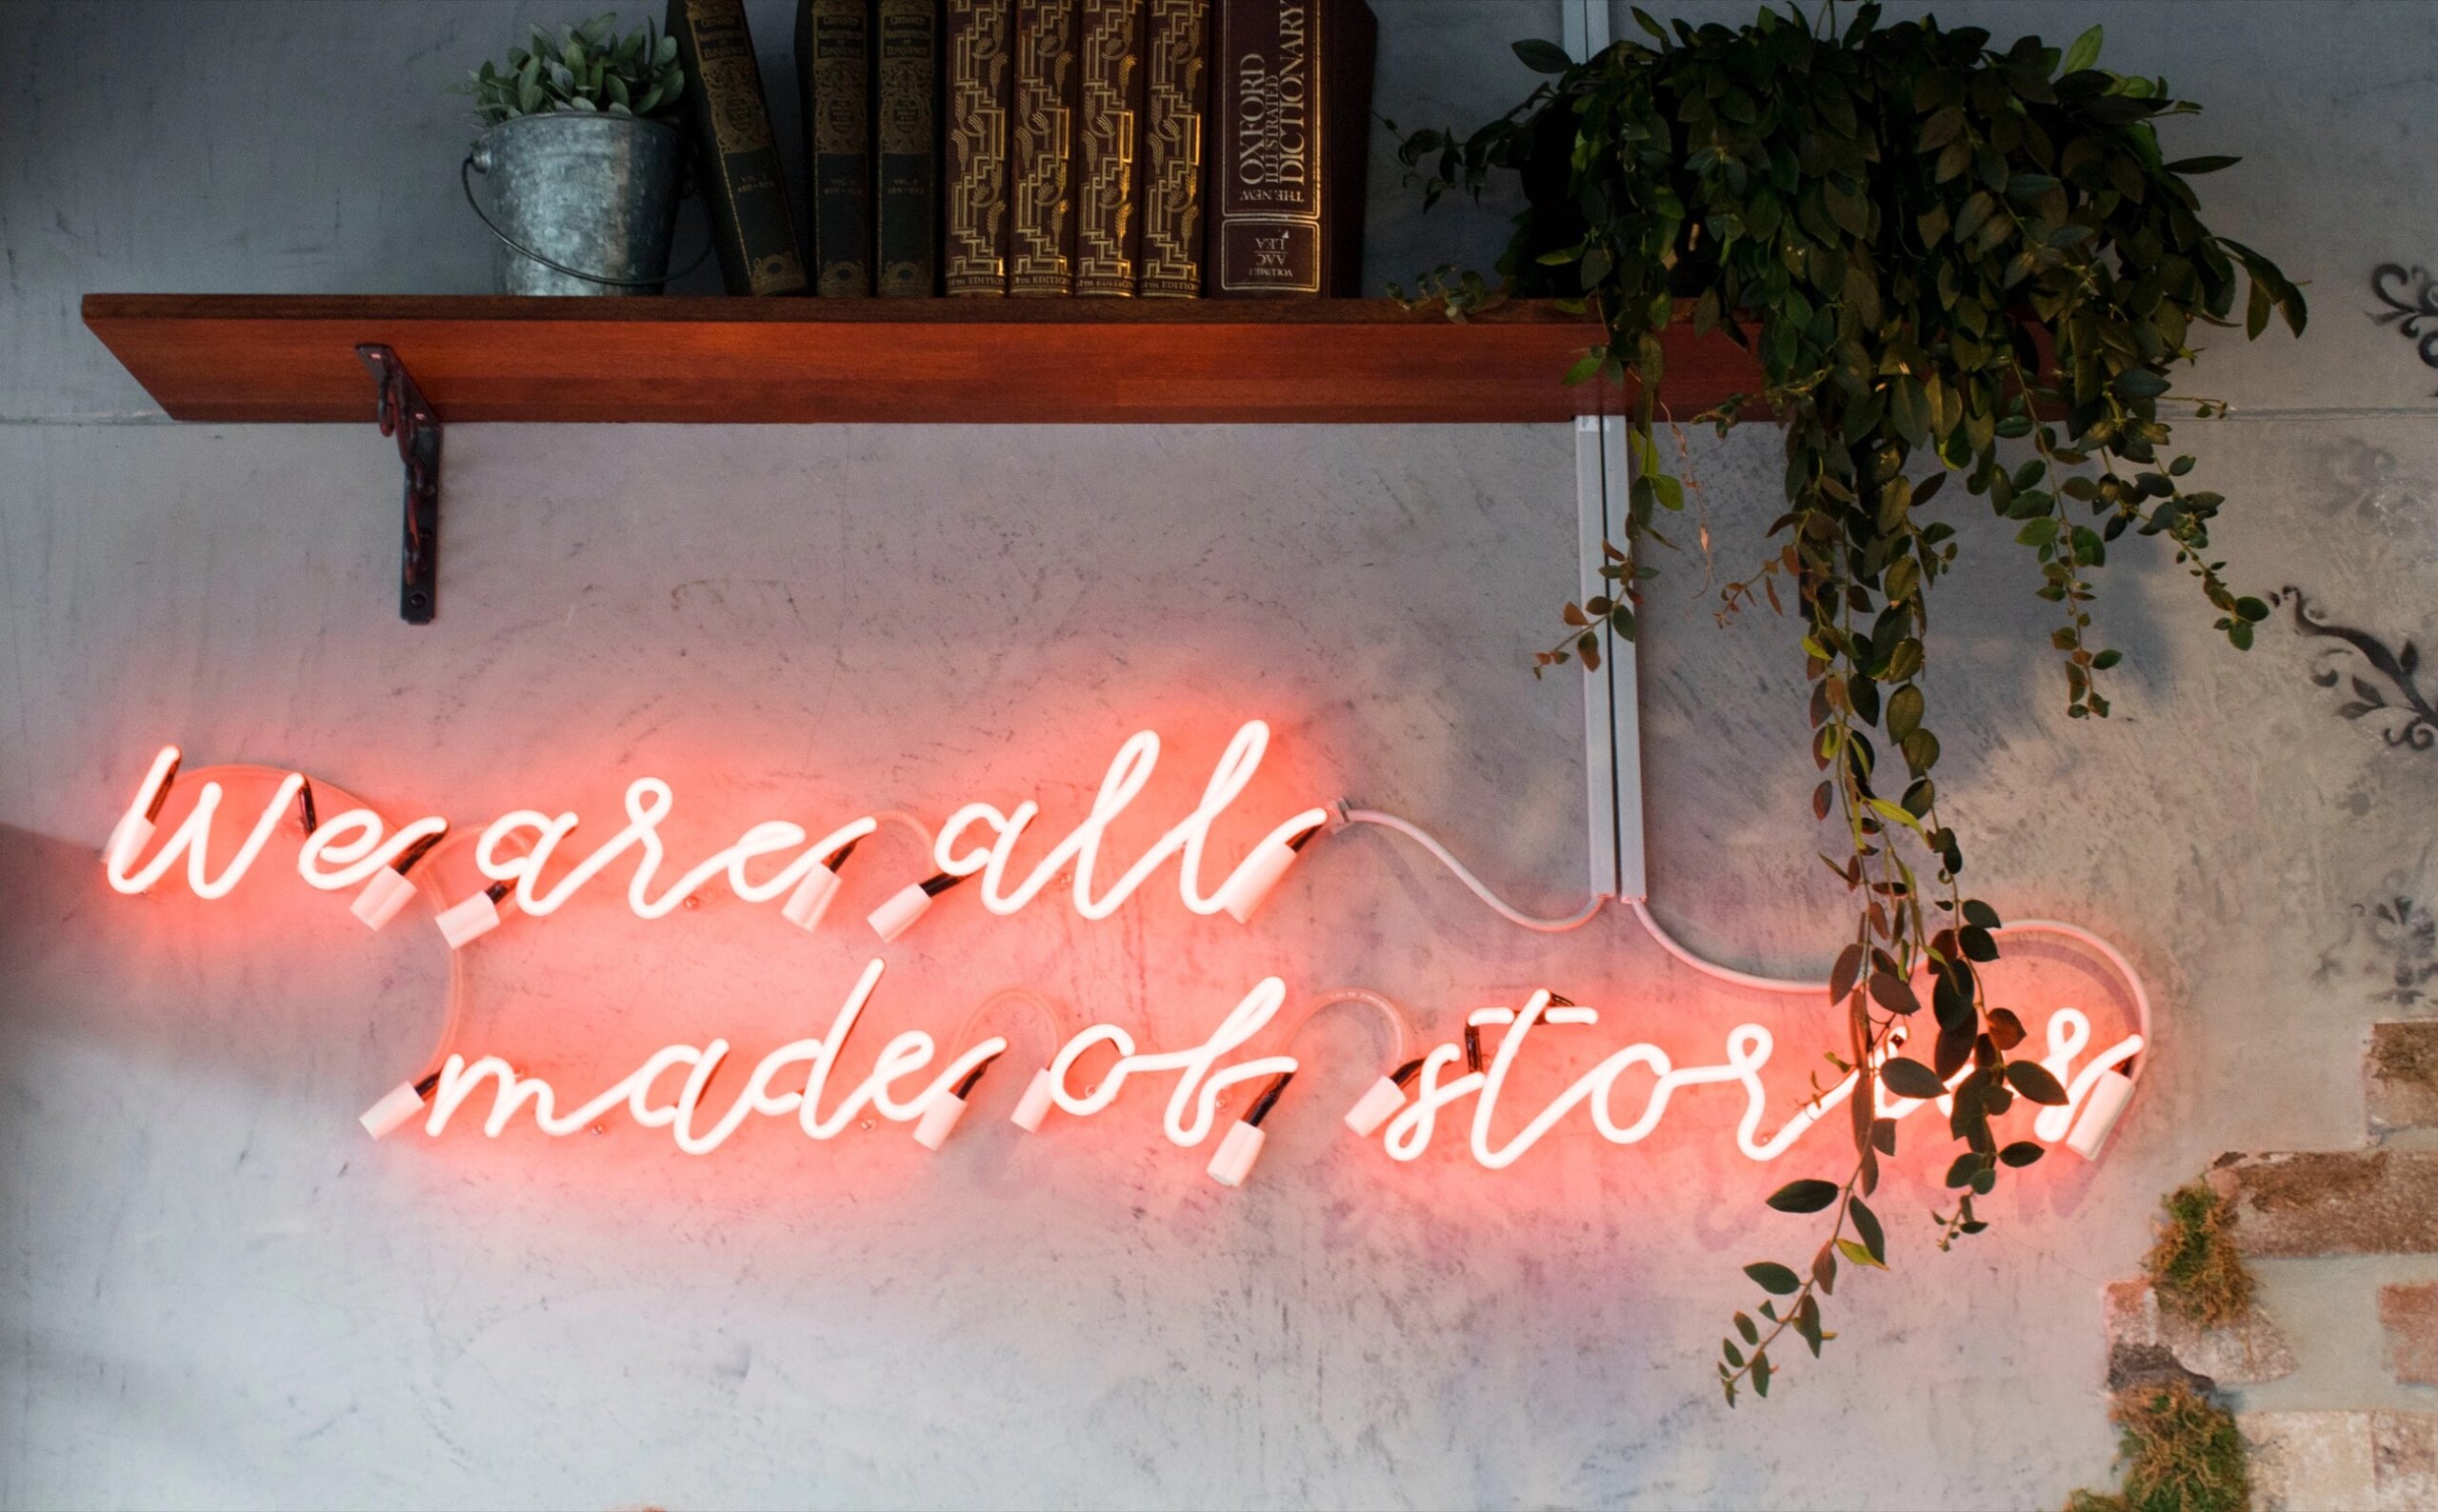 Neon sign that reads, "We are all made of stories"